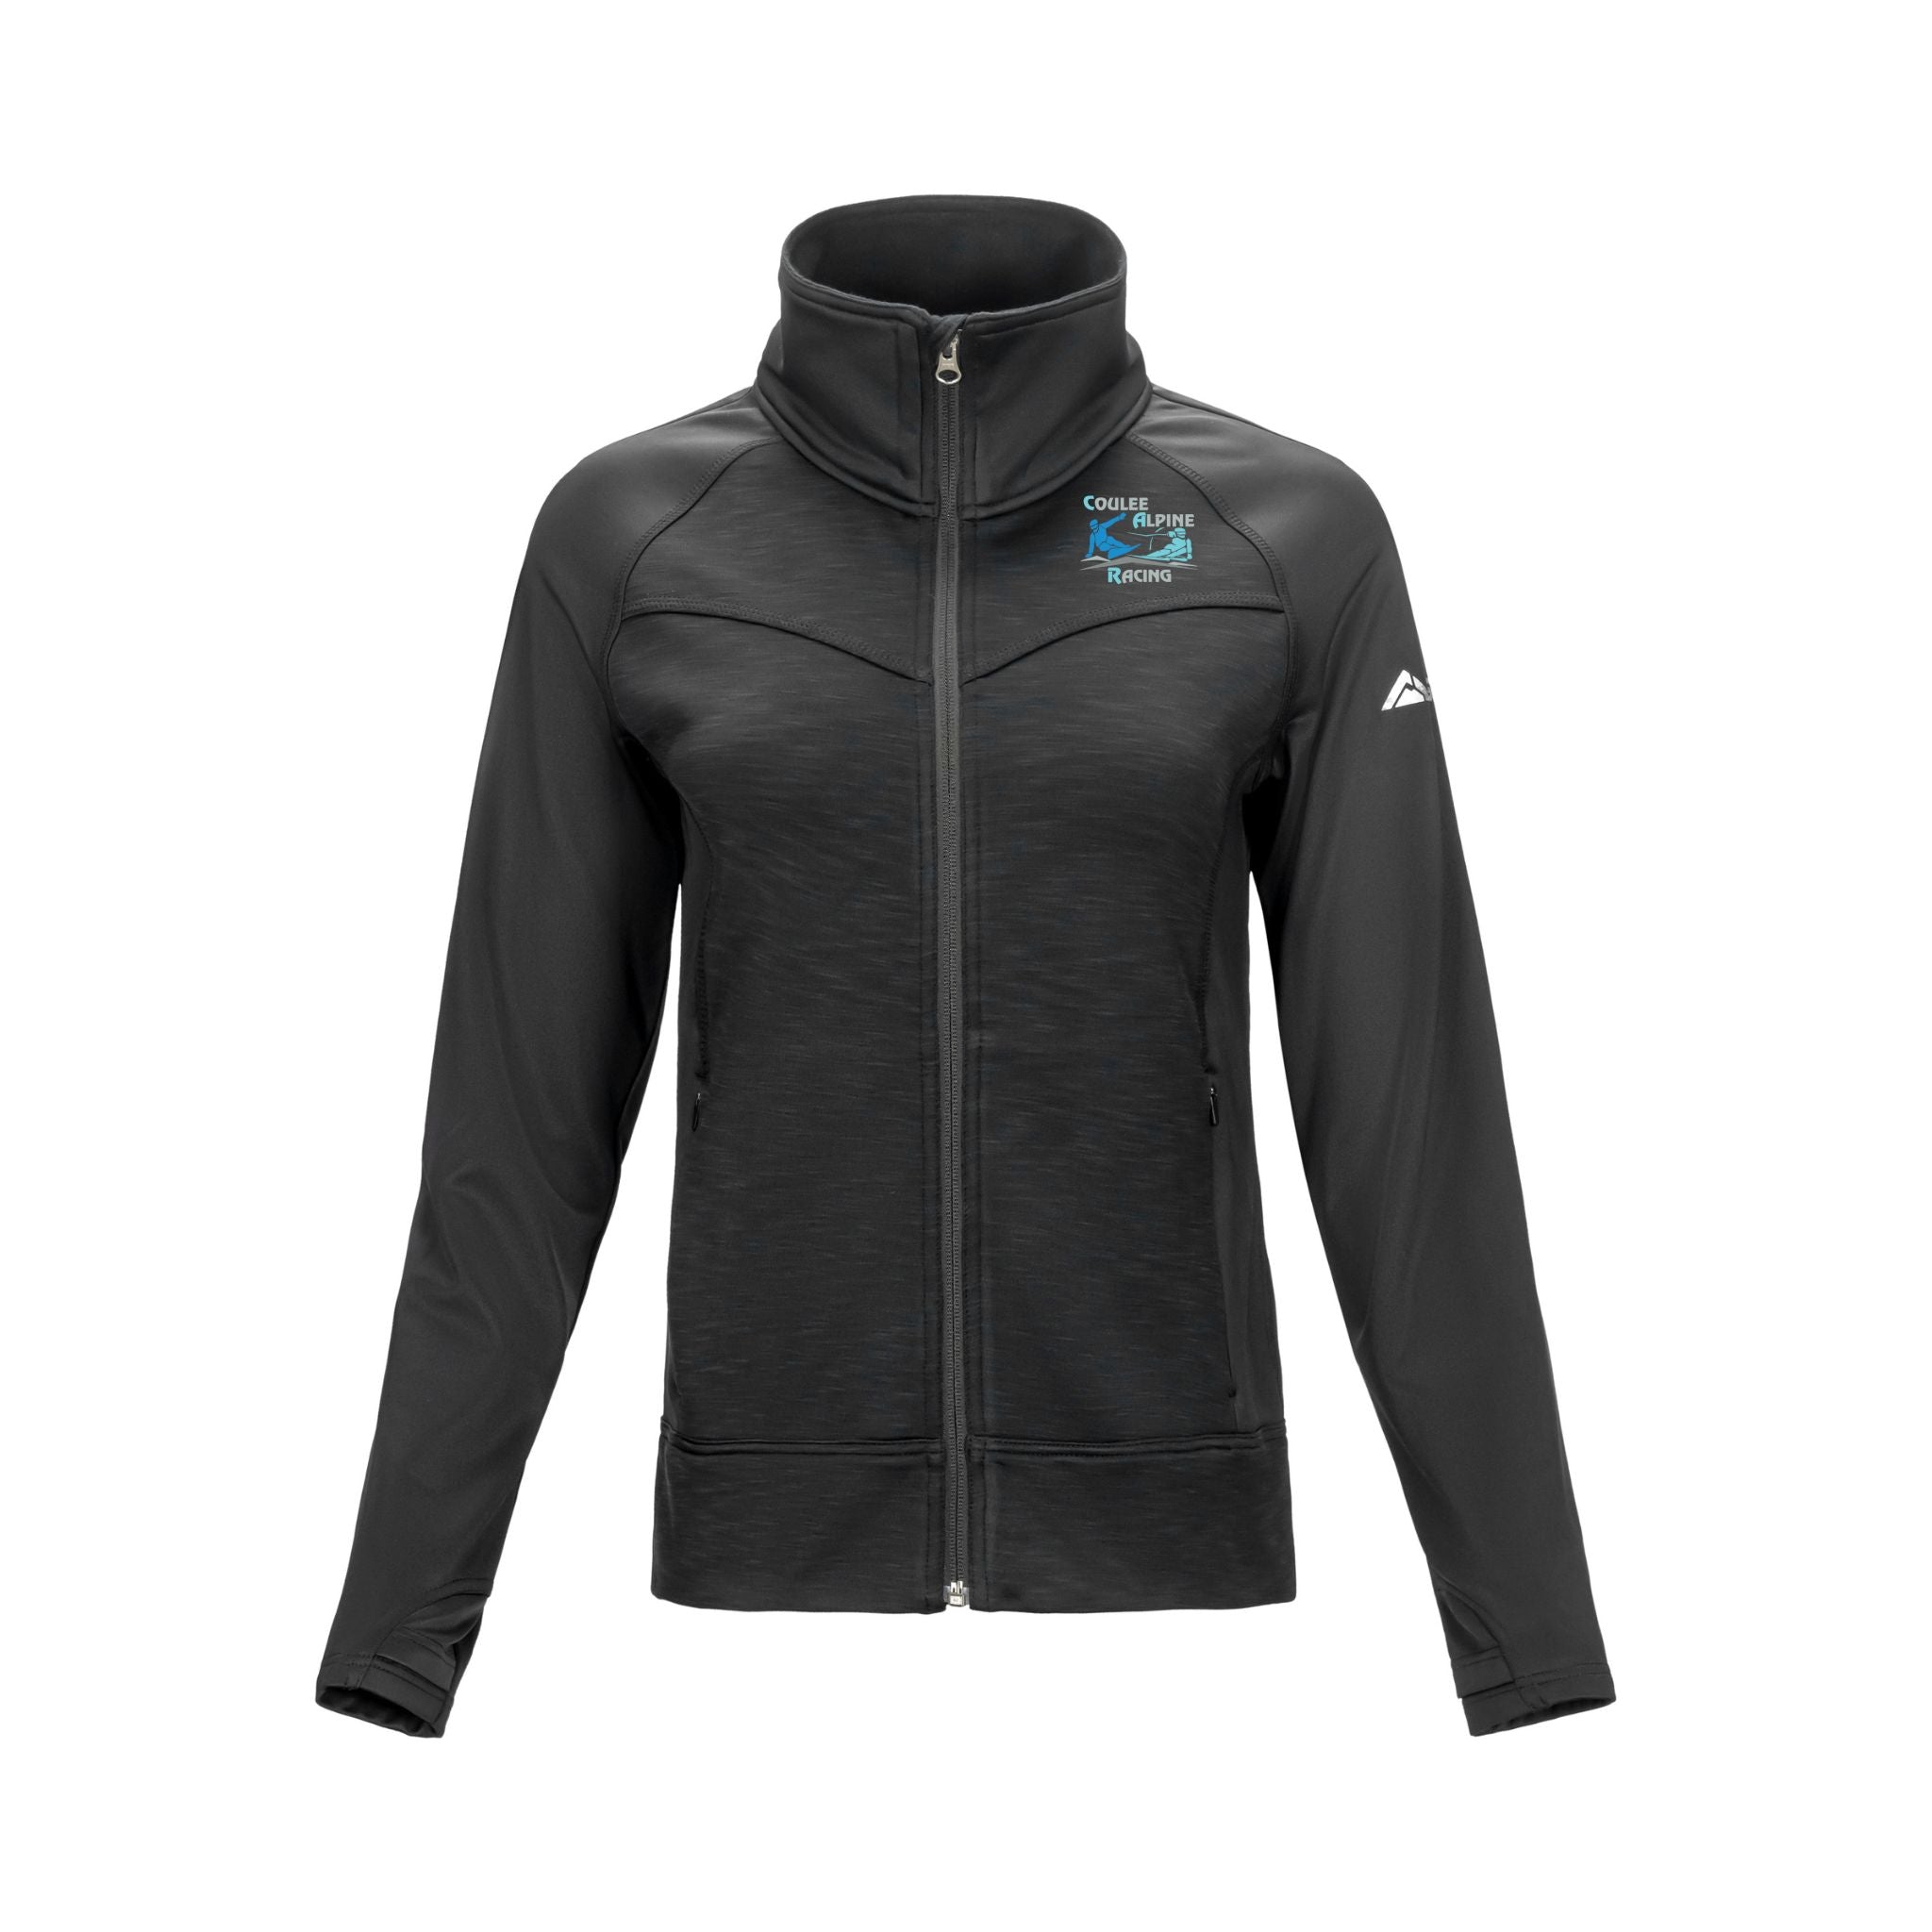 Women's Benchmark Jacket - Coulee